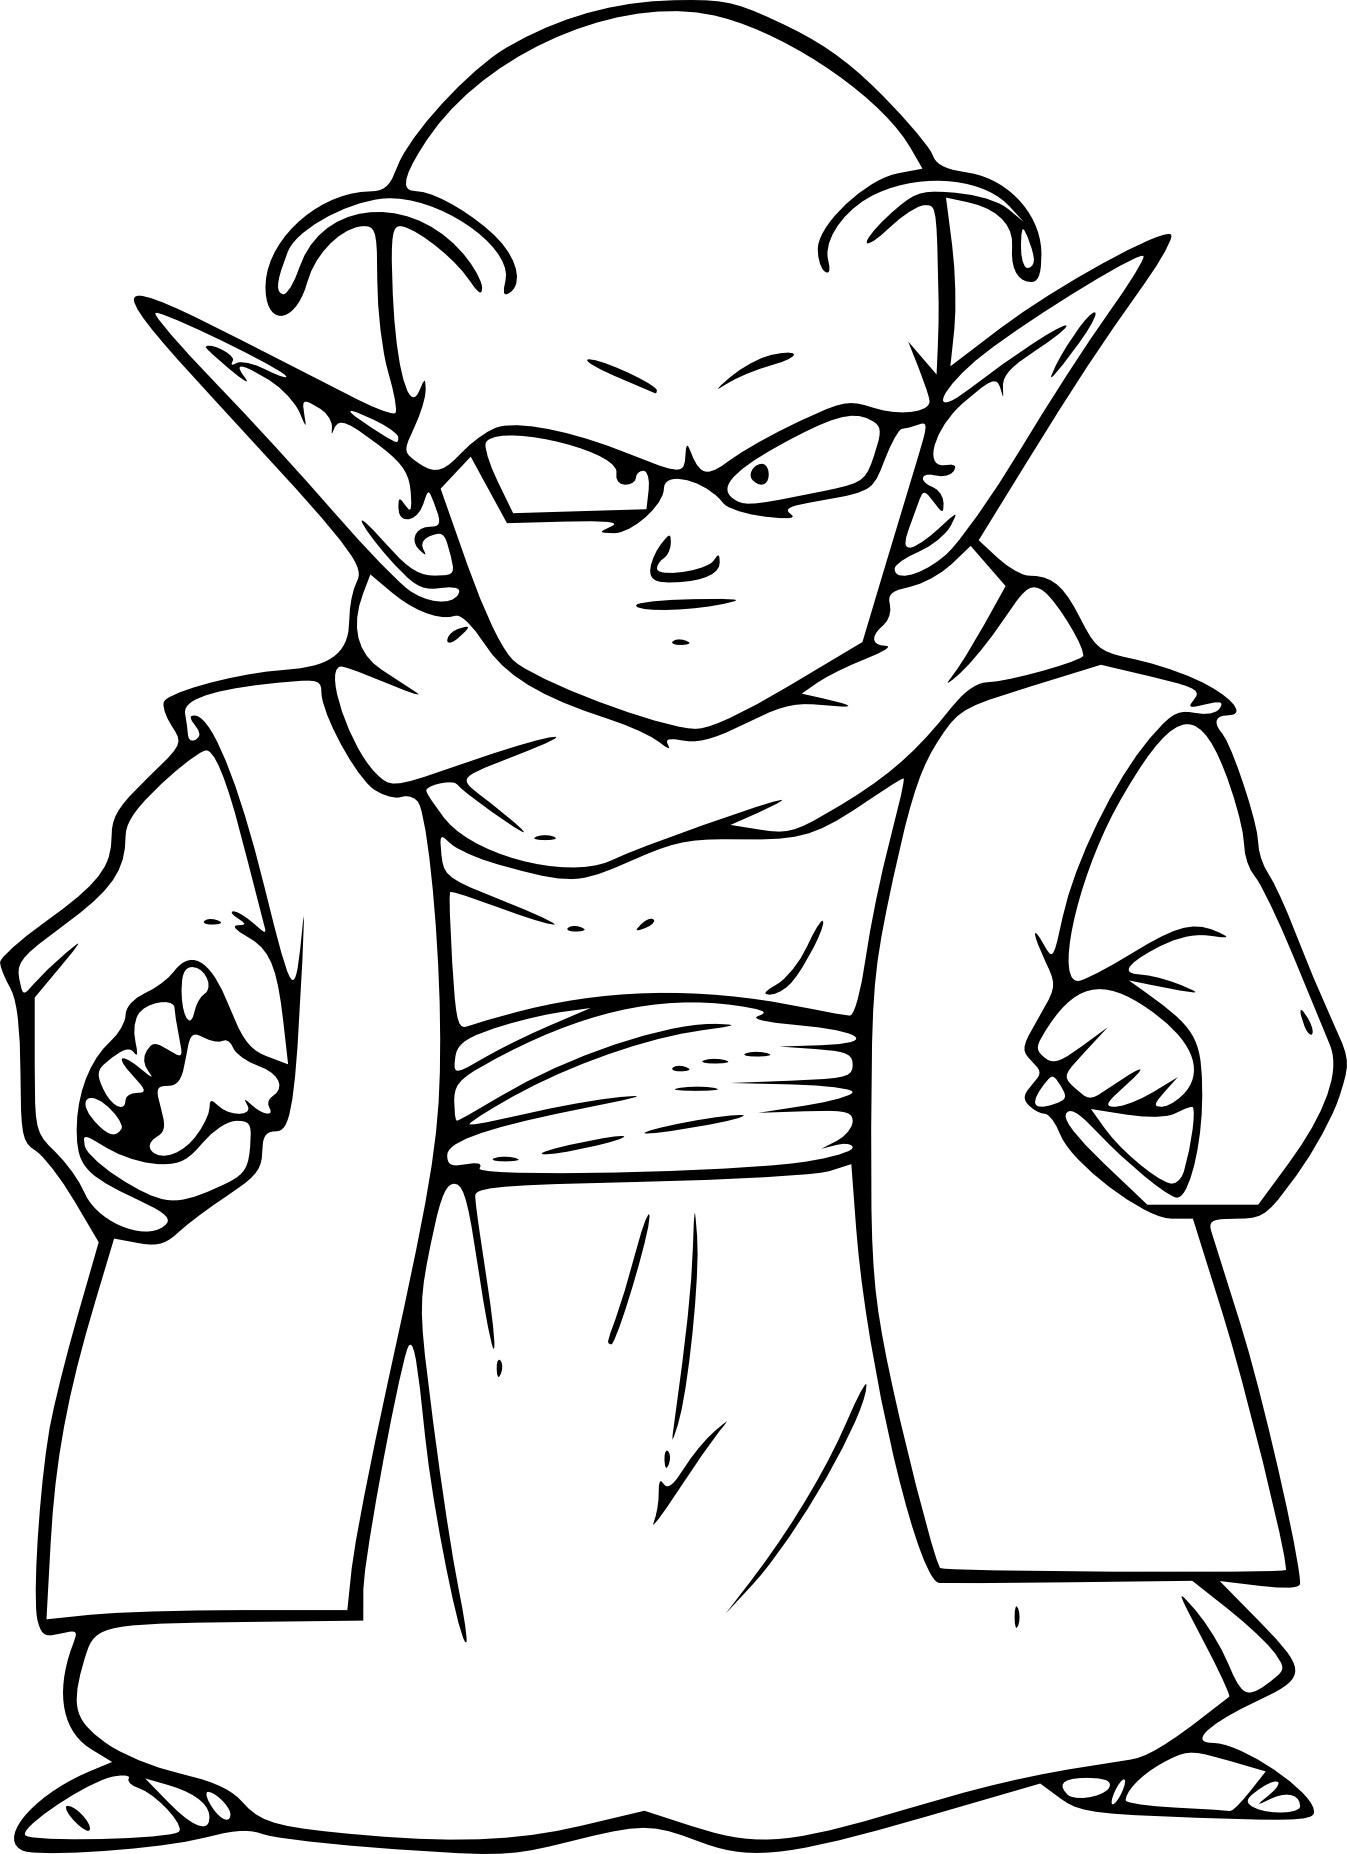 Dbz Dende From Namek coloring page